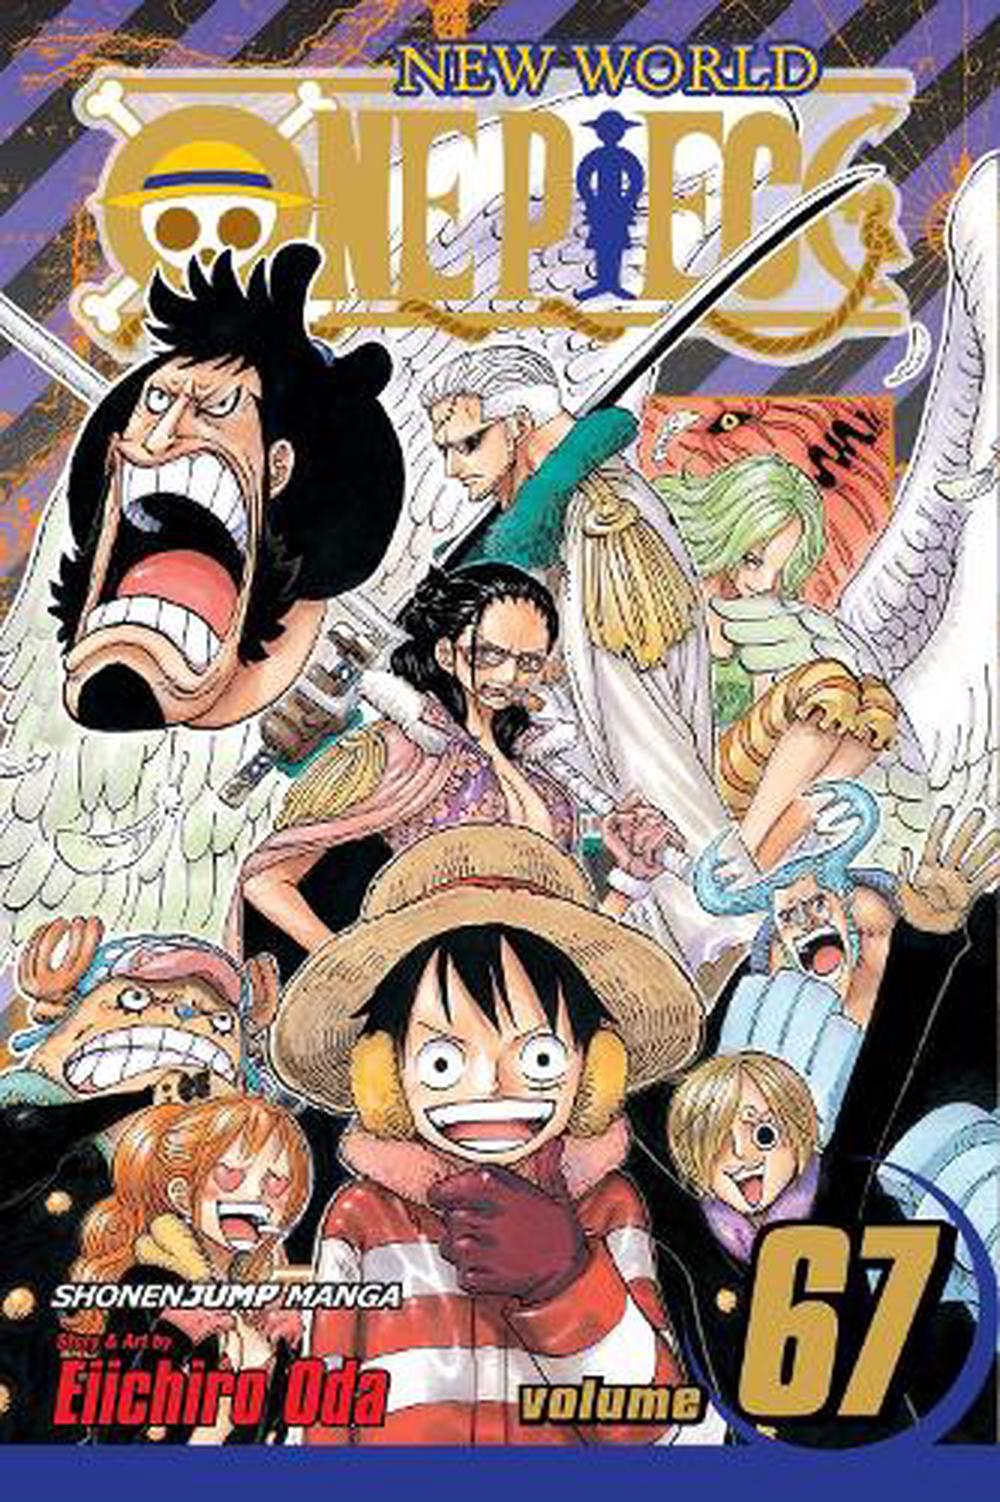 One Piece Vol 67 By Eiichiro Oda Paperback Buy Online At The Nile